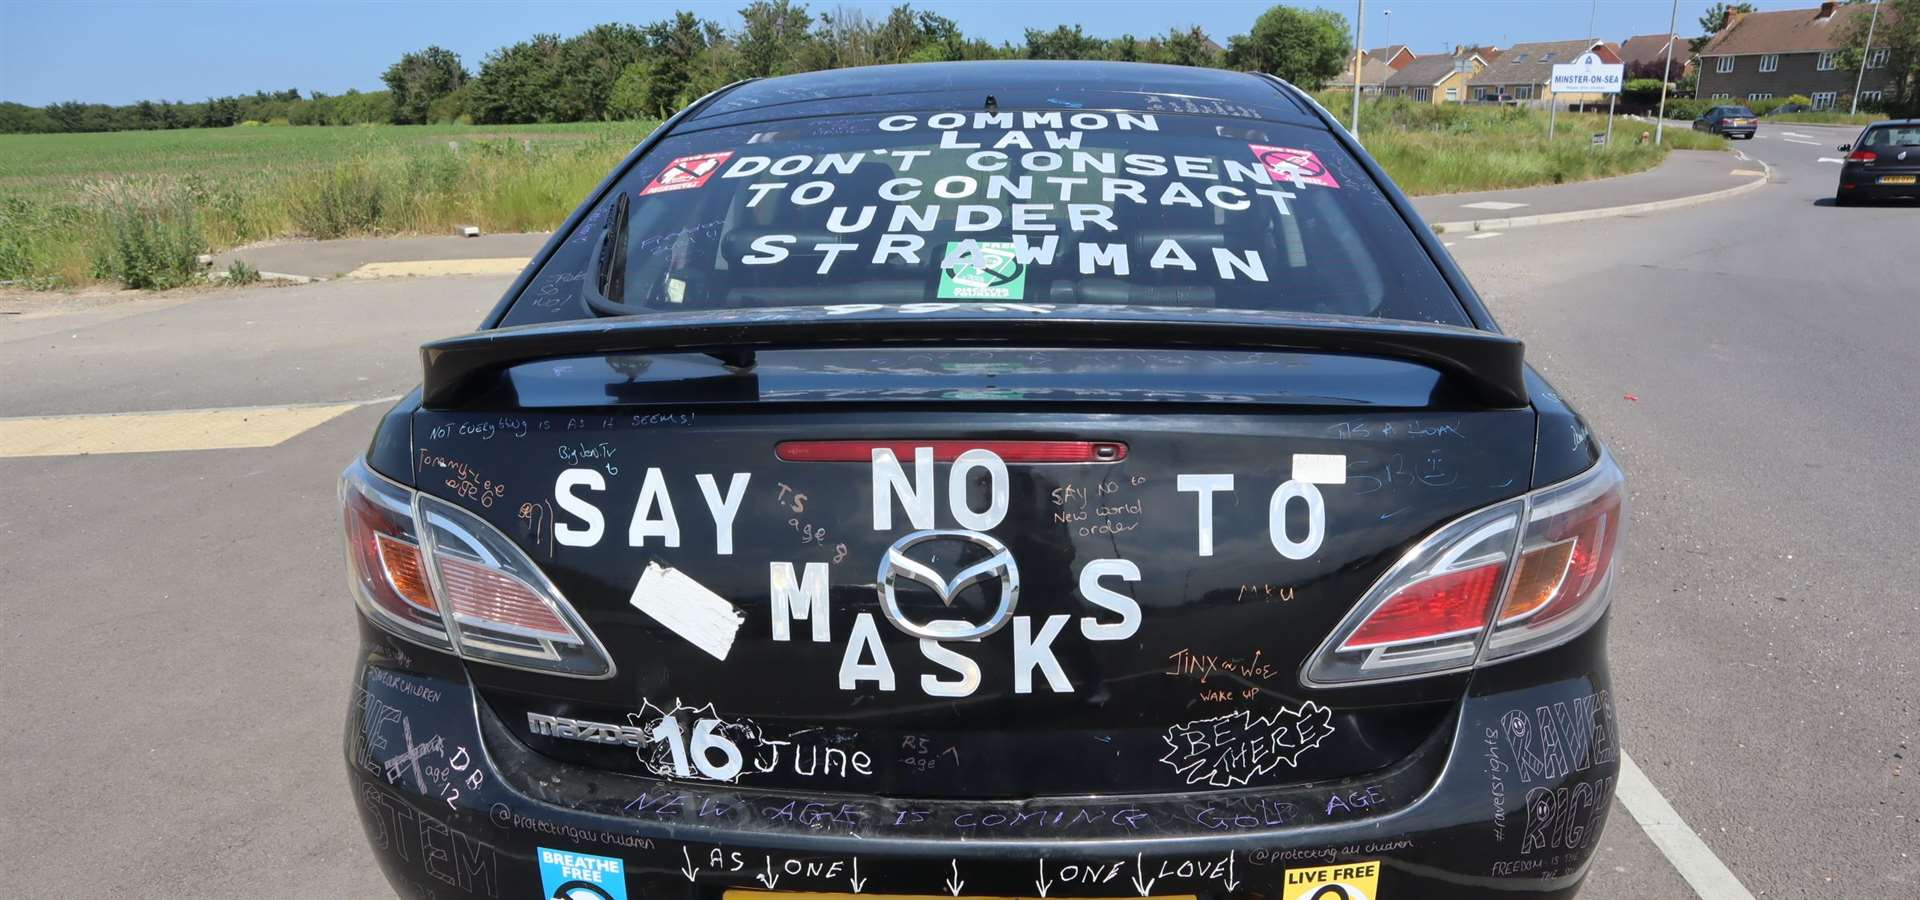 'Say no to masks'. One of the messages on the boot of the 'anti-covid' car parked at the Lower Road roundabout at Minster, Sheppey